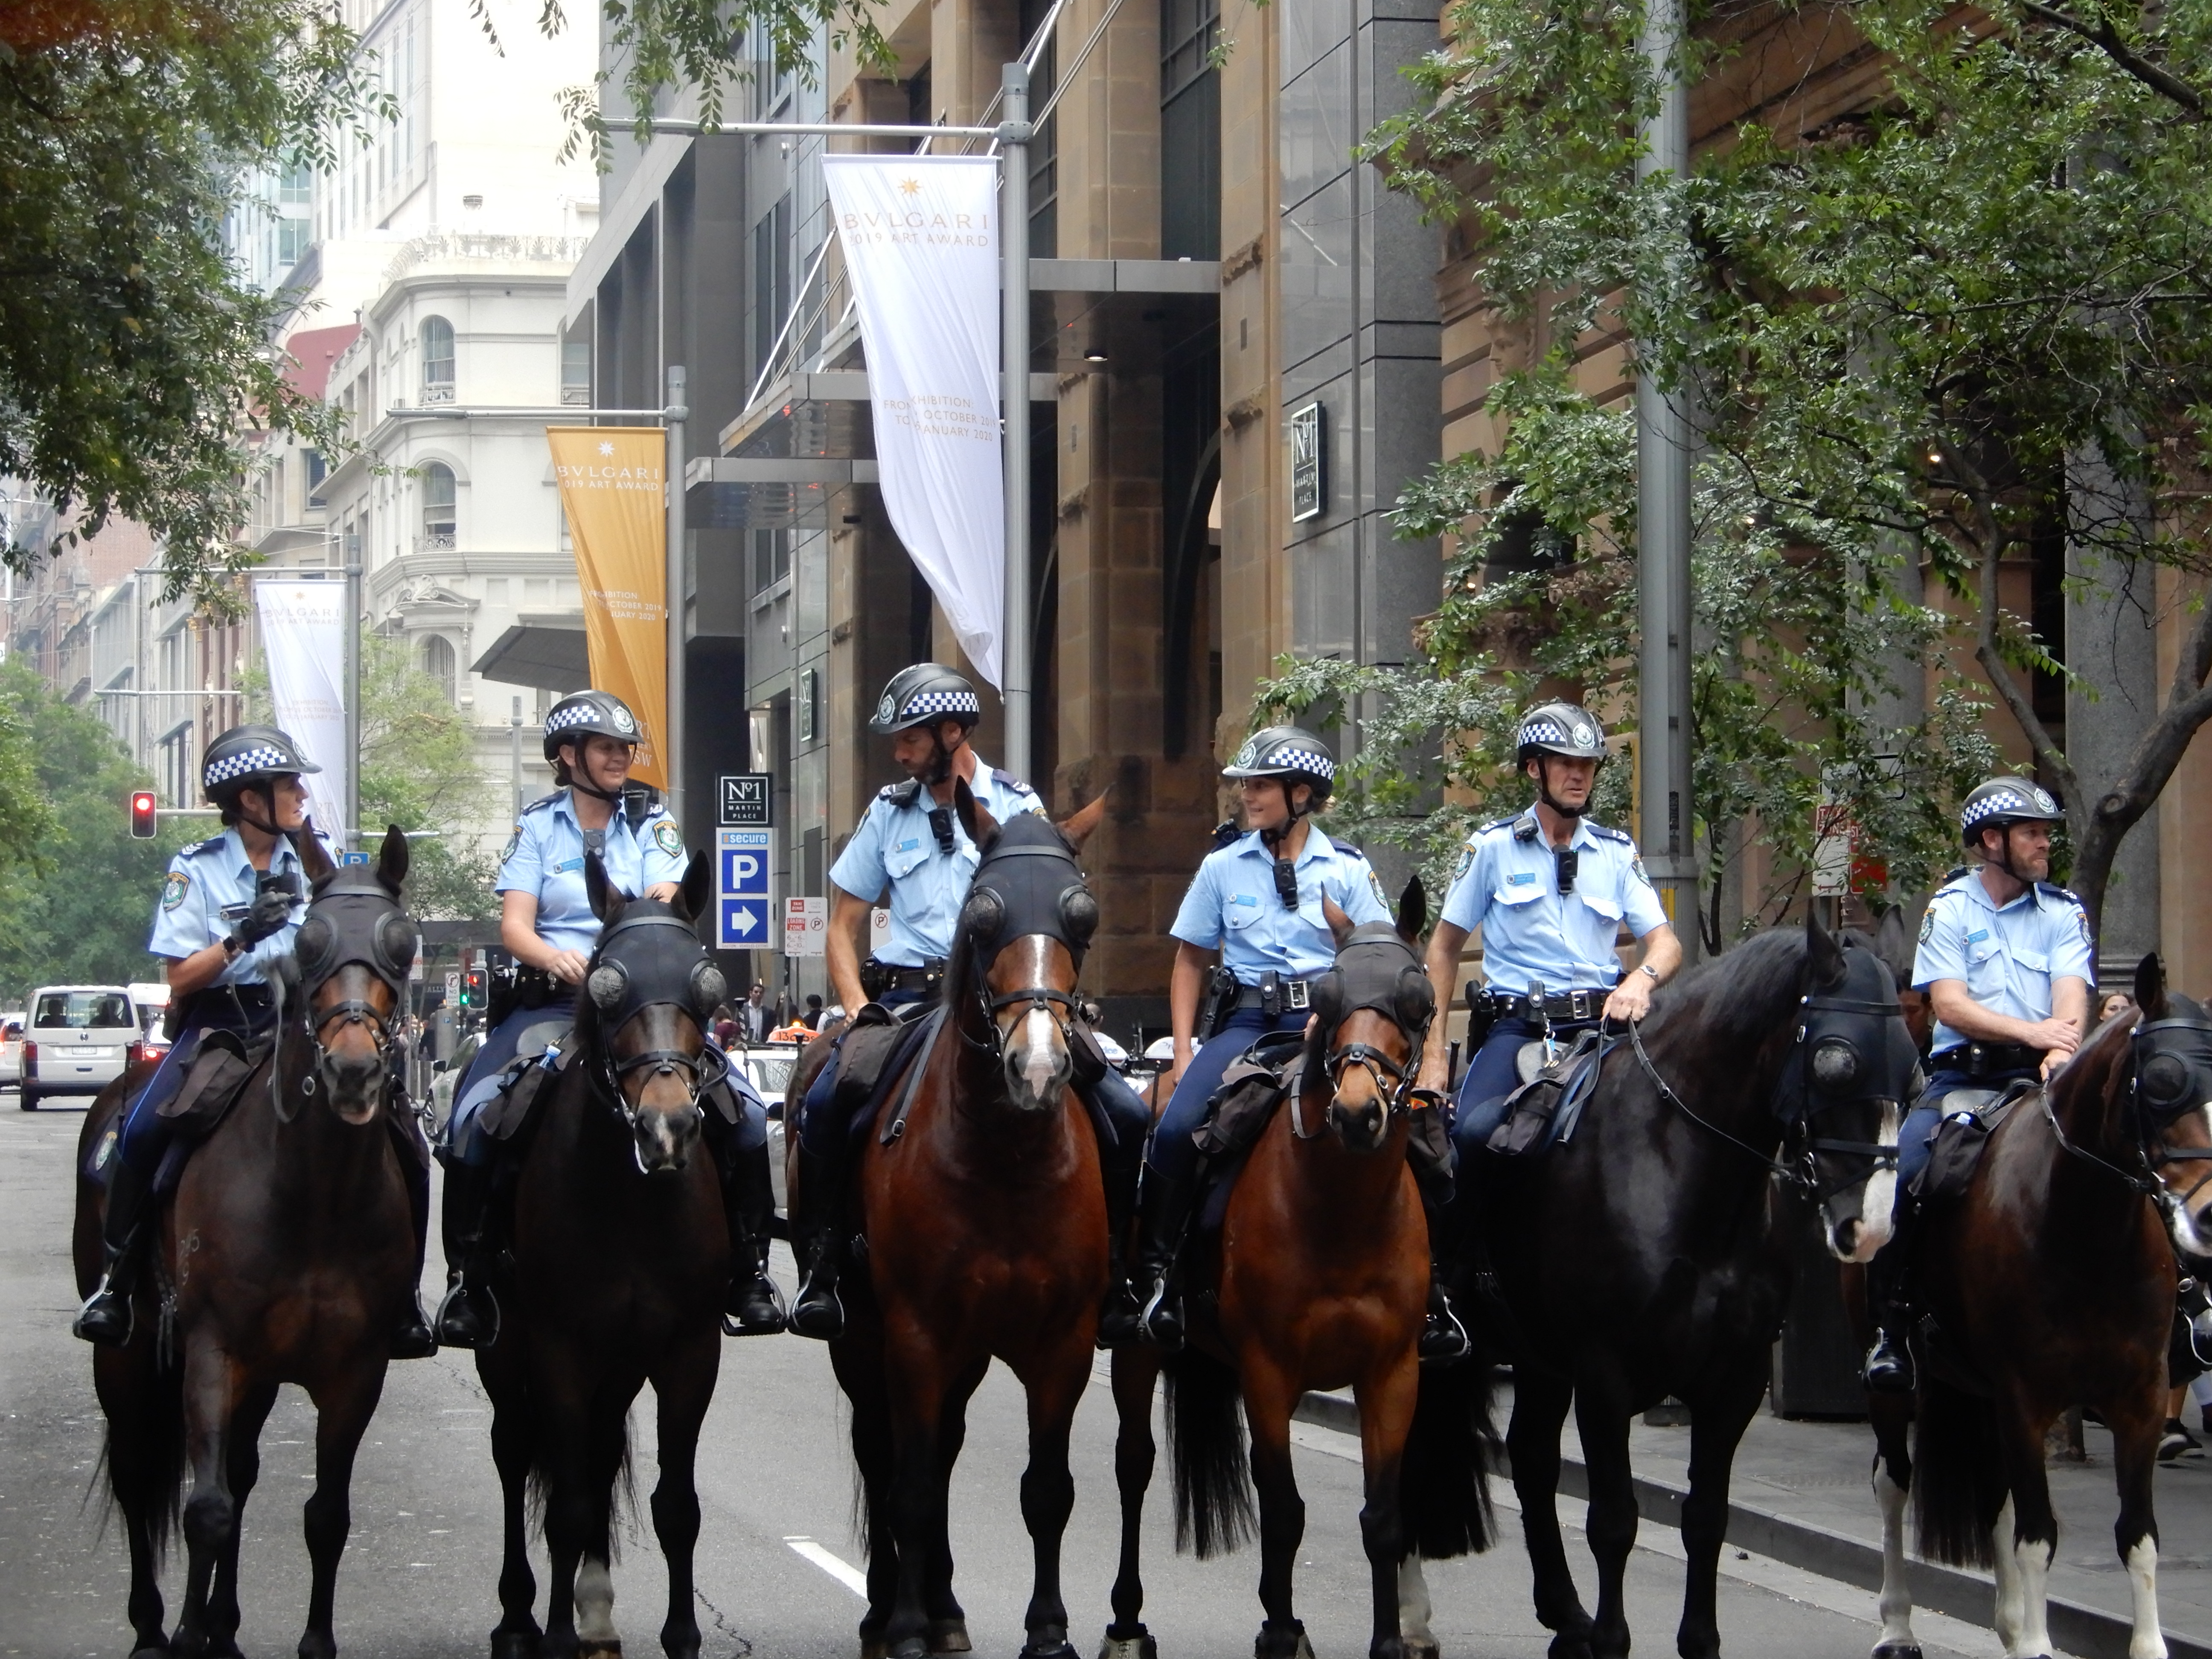 NSW mounted police were deployed to Sydney’s southwest to enforce lockdown restrictions